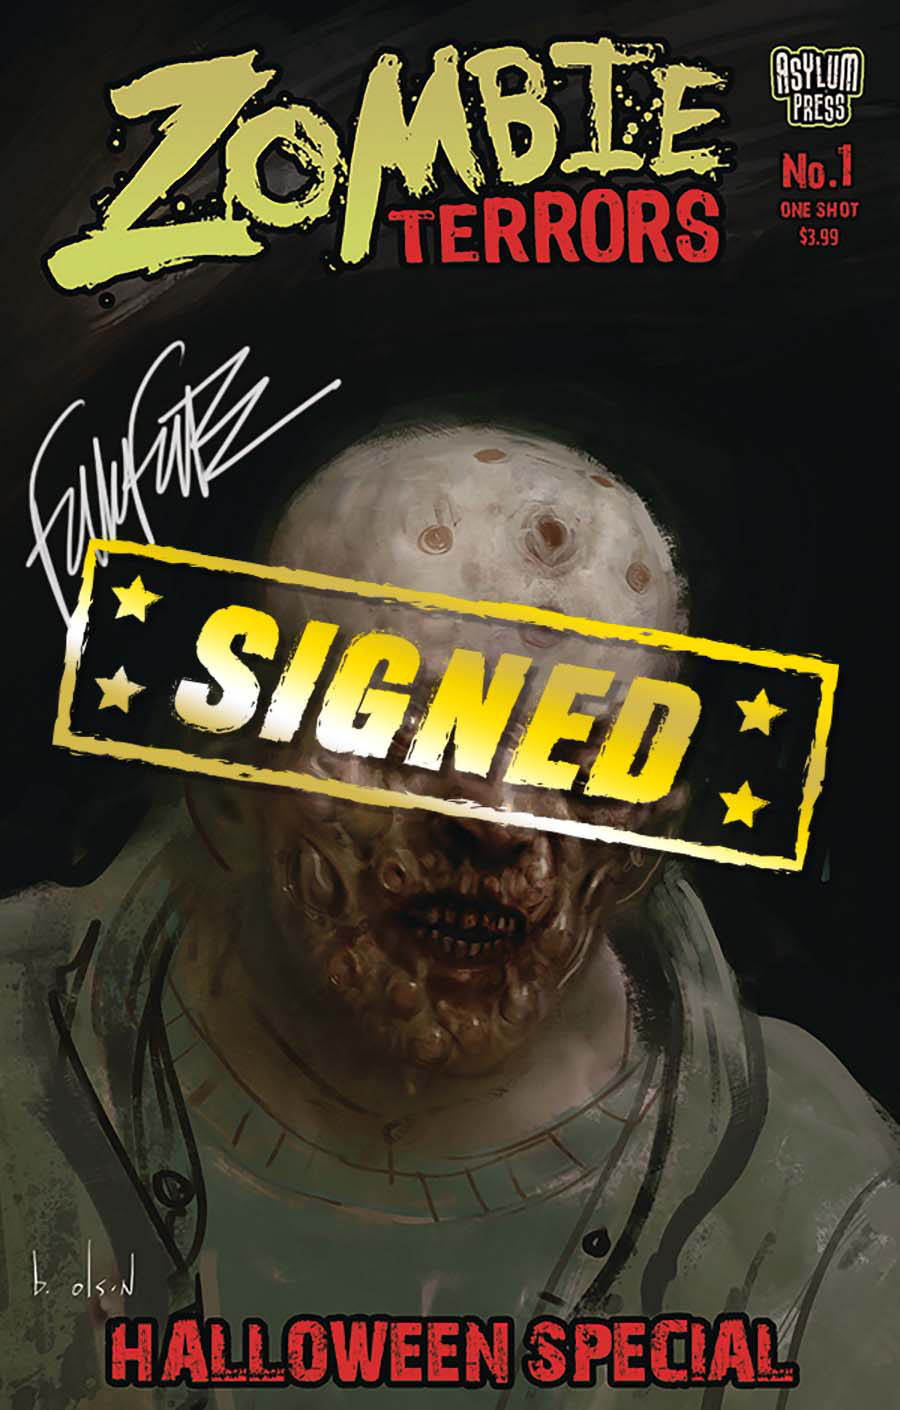 Zombie Terrors Halloween Special #1 (One Shot) Cover D Variant Ben Olson Cover Signed Edition